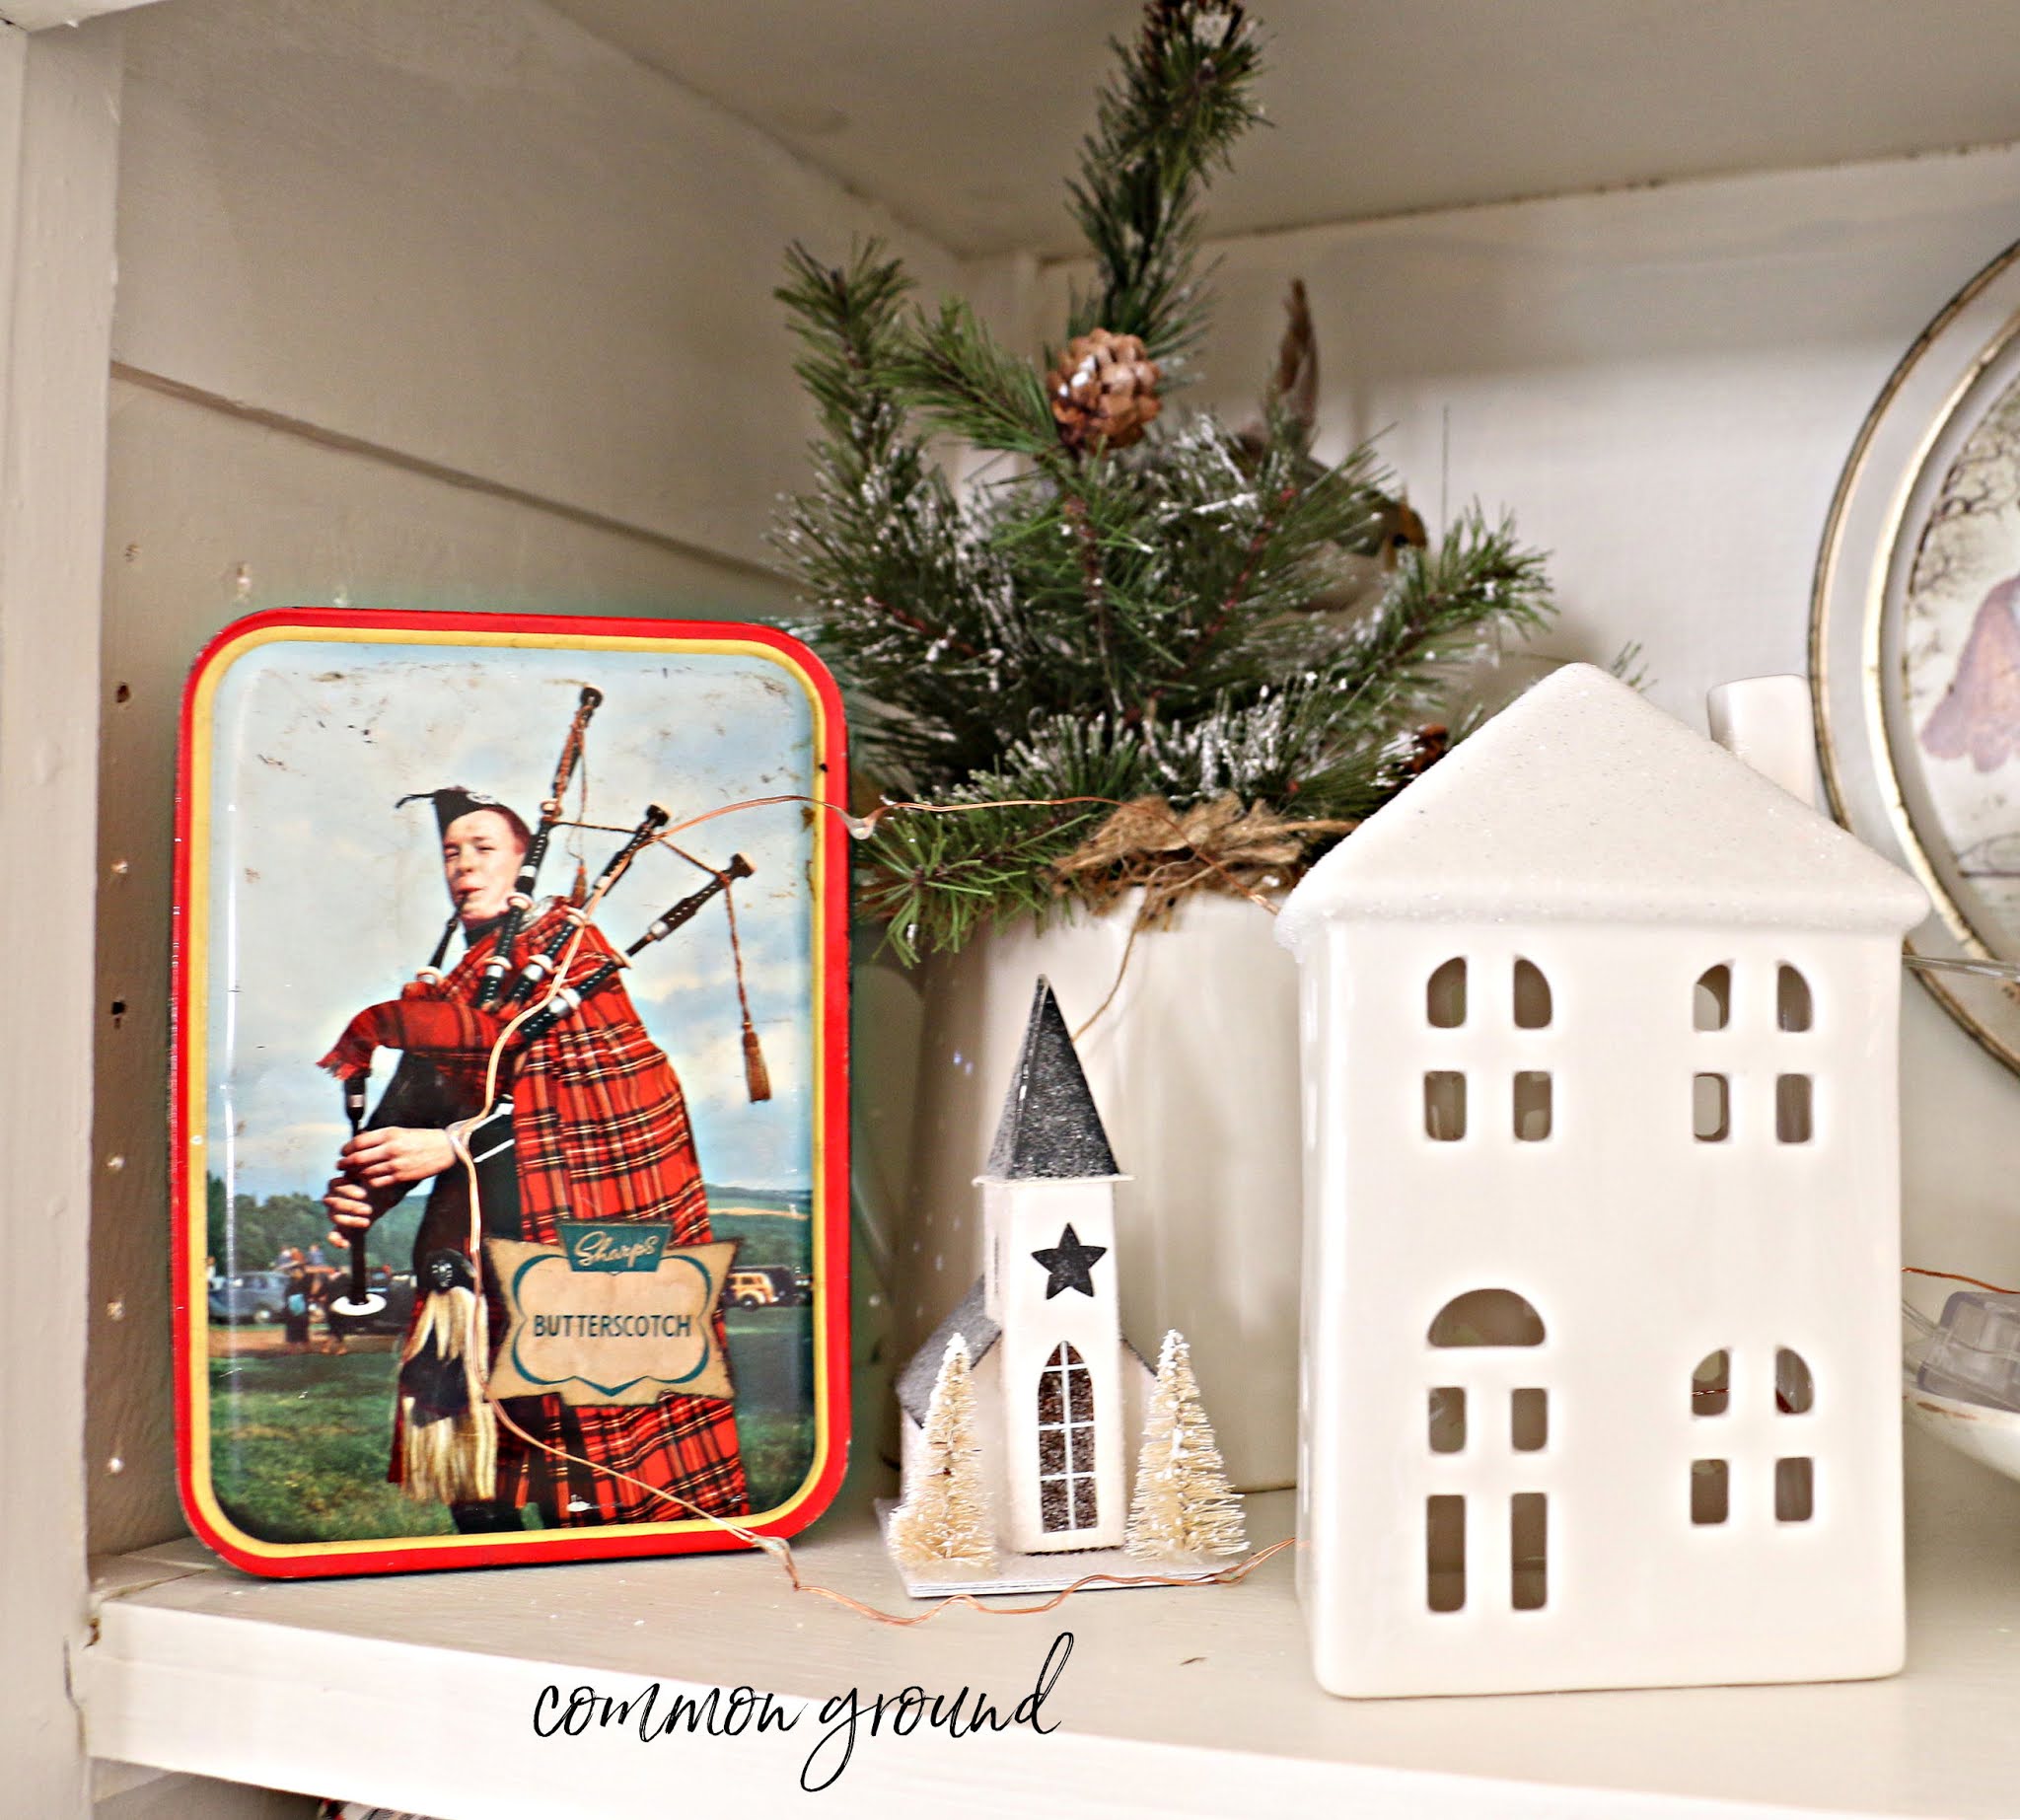 common ground : Vintage Christmas Ornament Boxes